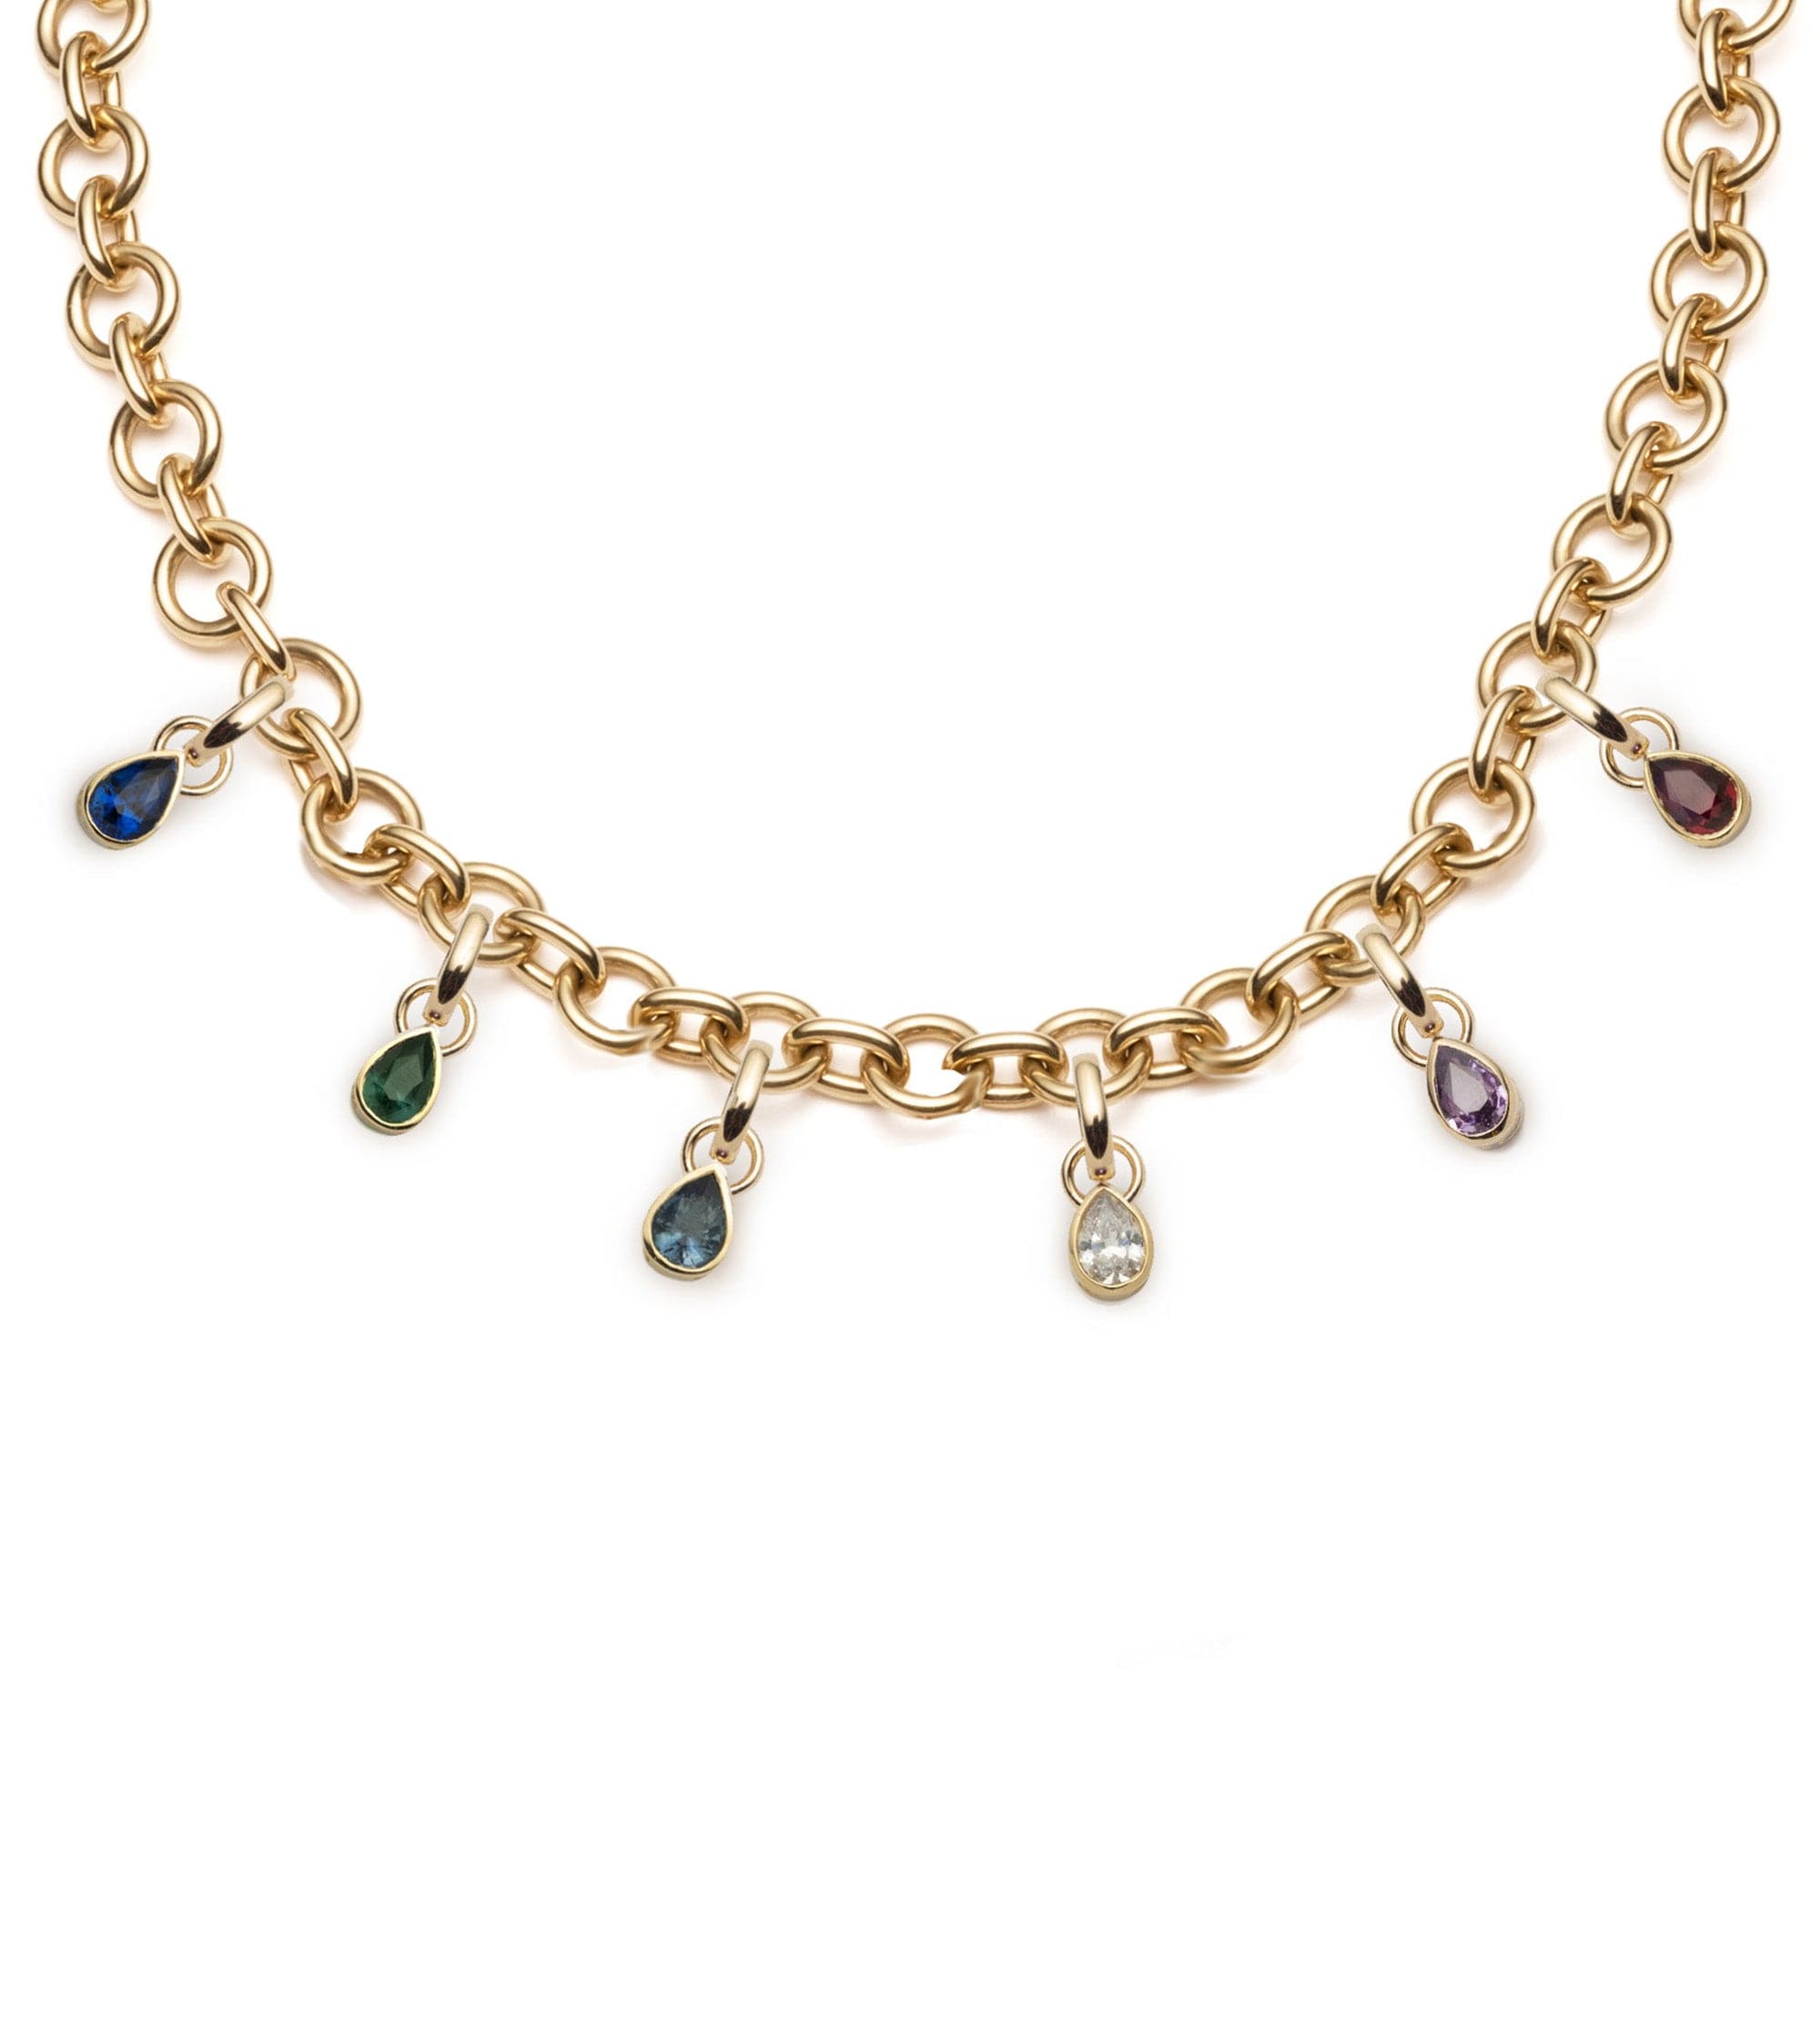 Forever & Always a Pair : Diamond, Emerald, Ruby, and Sapphire Midsized Mixed Link Chain Necklace